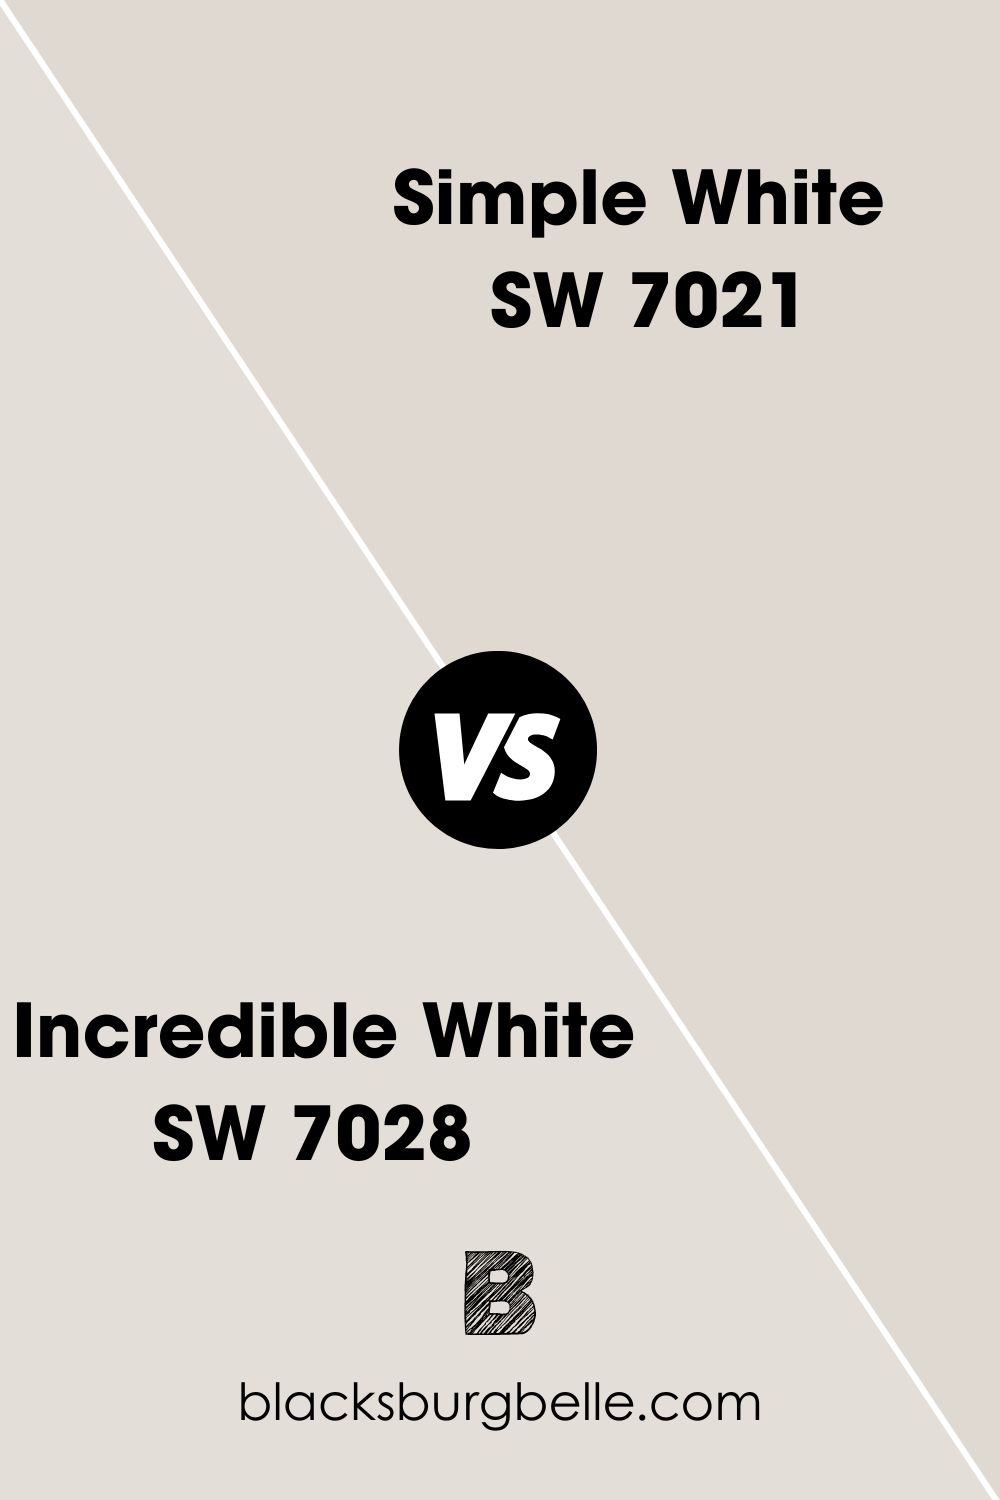 Incredible White SW 7028